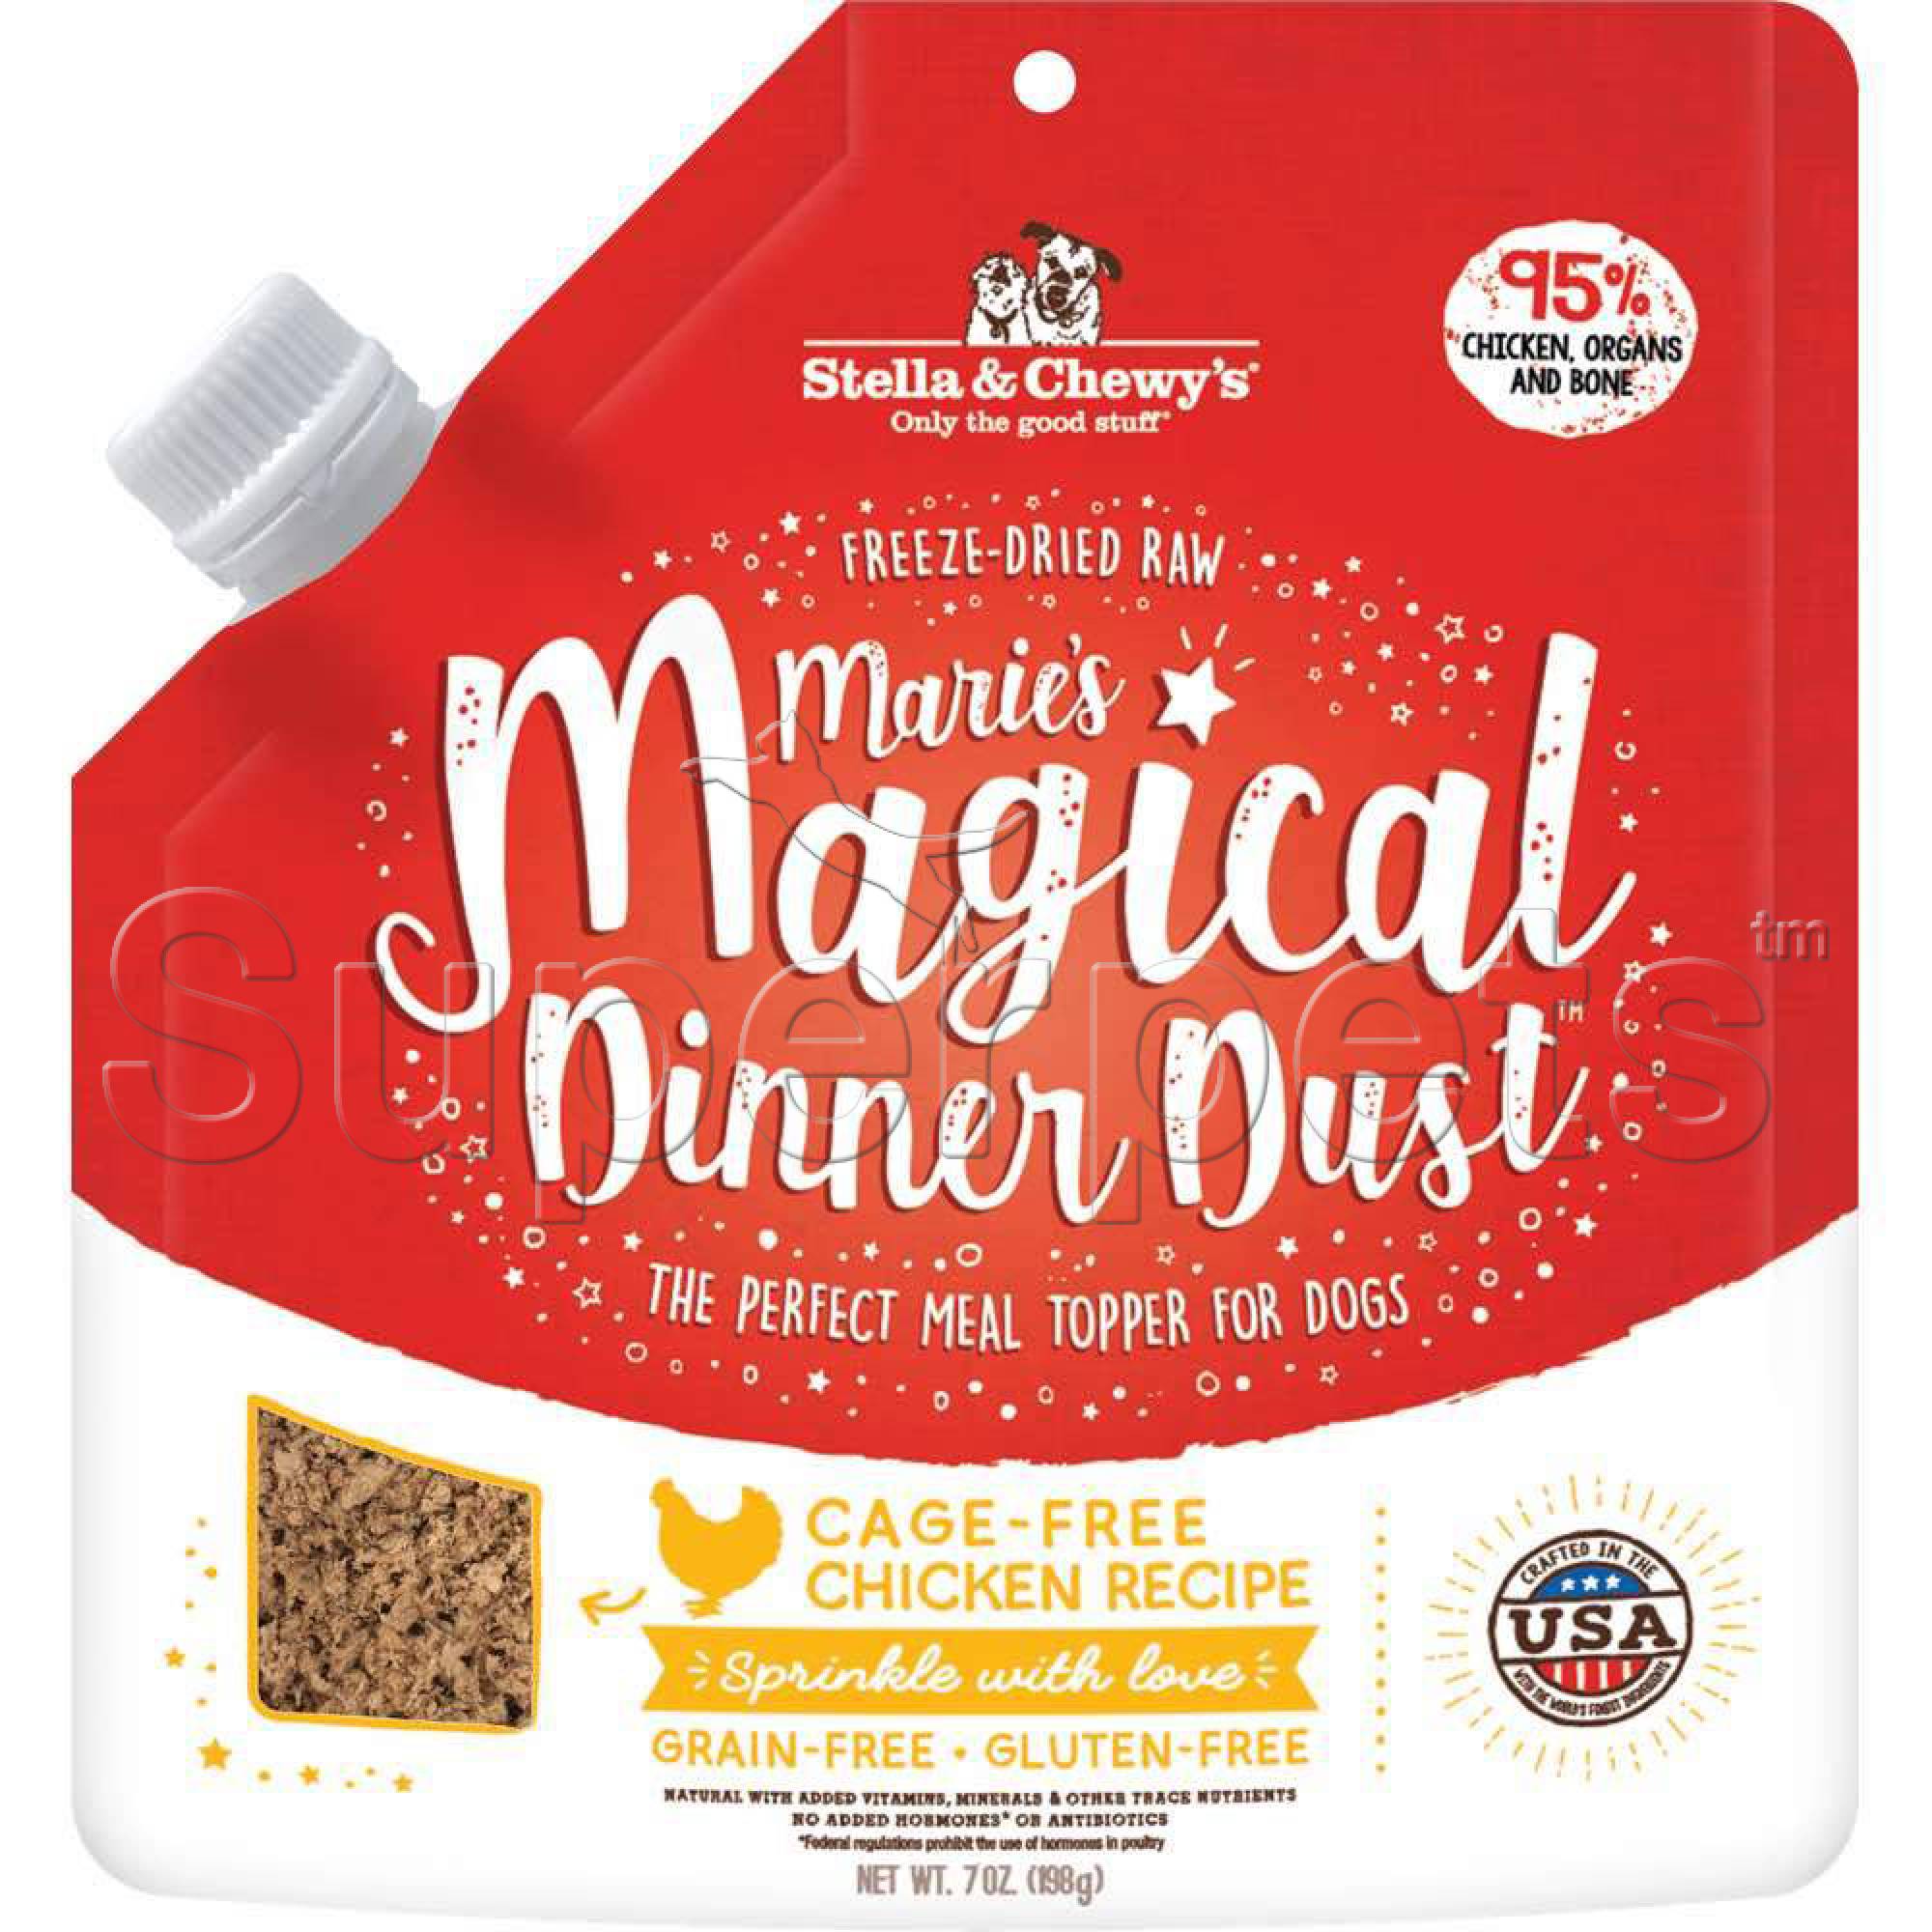 Stella & Chewy's - Dog Freeze-Dried Raw Maries Magical Dinner Dust Topper - Cage-Free Chicken Recipe 7oz (198g)